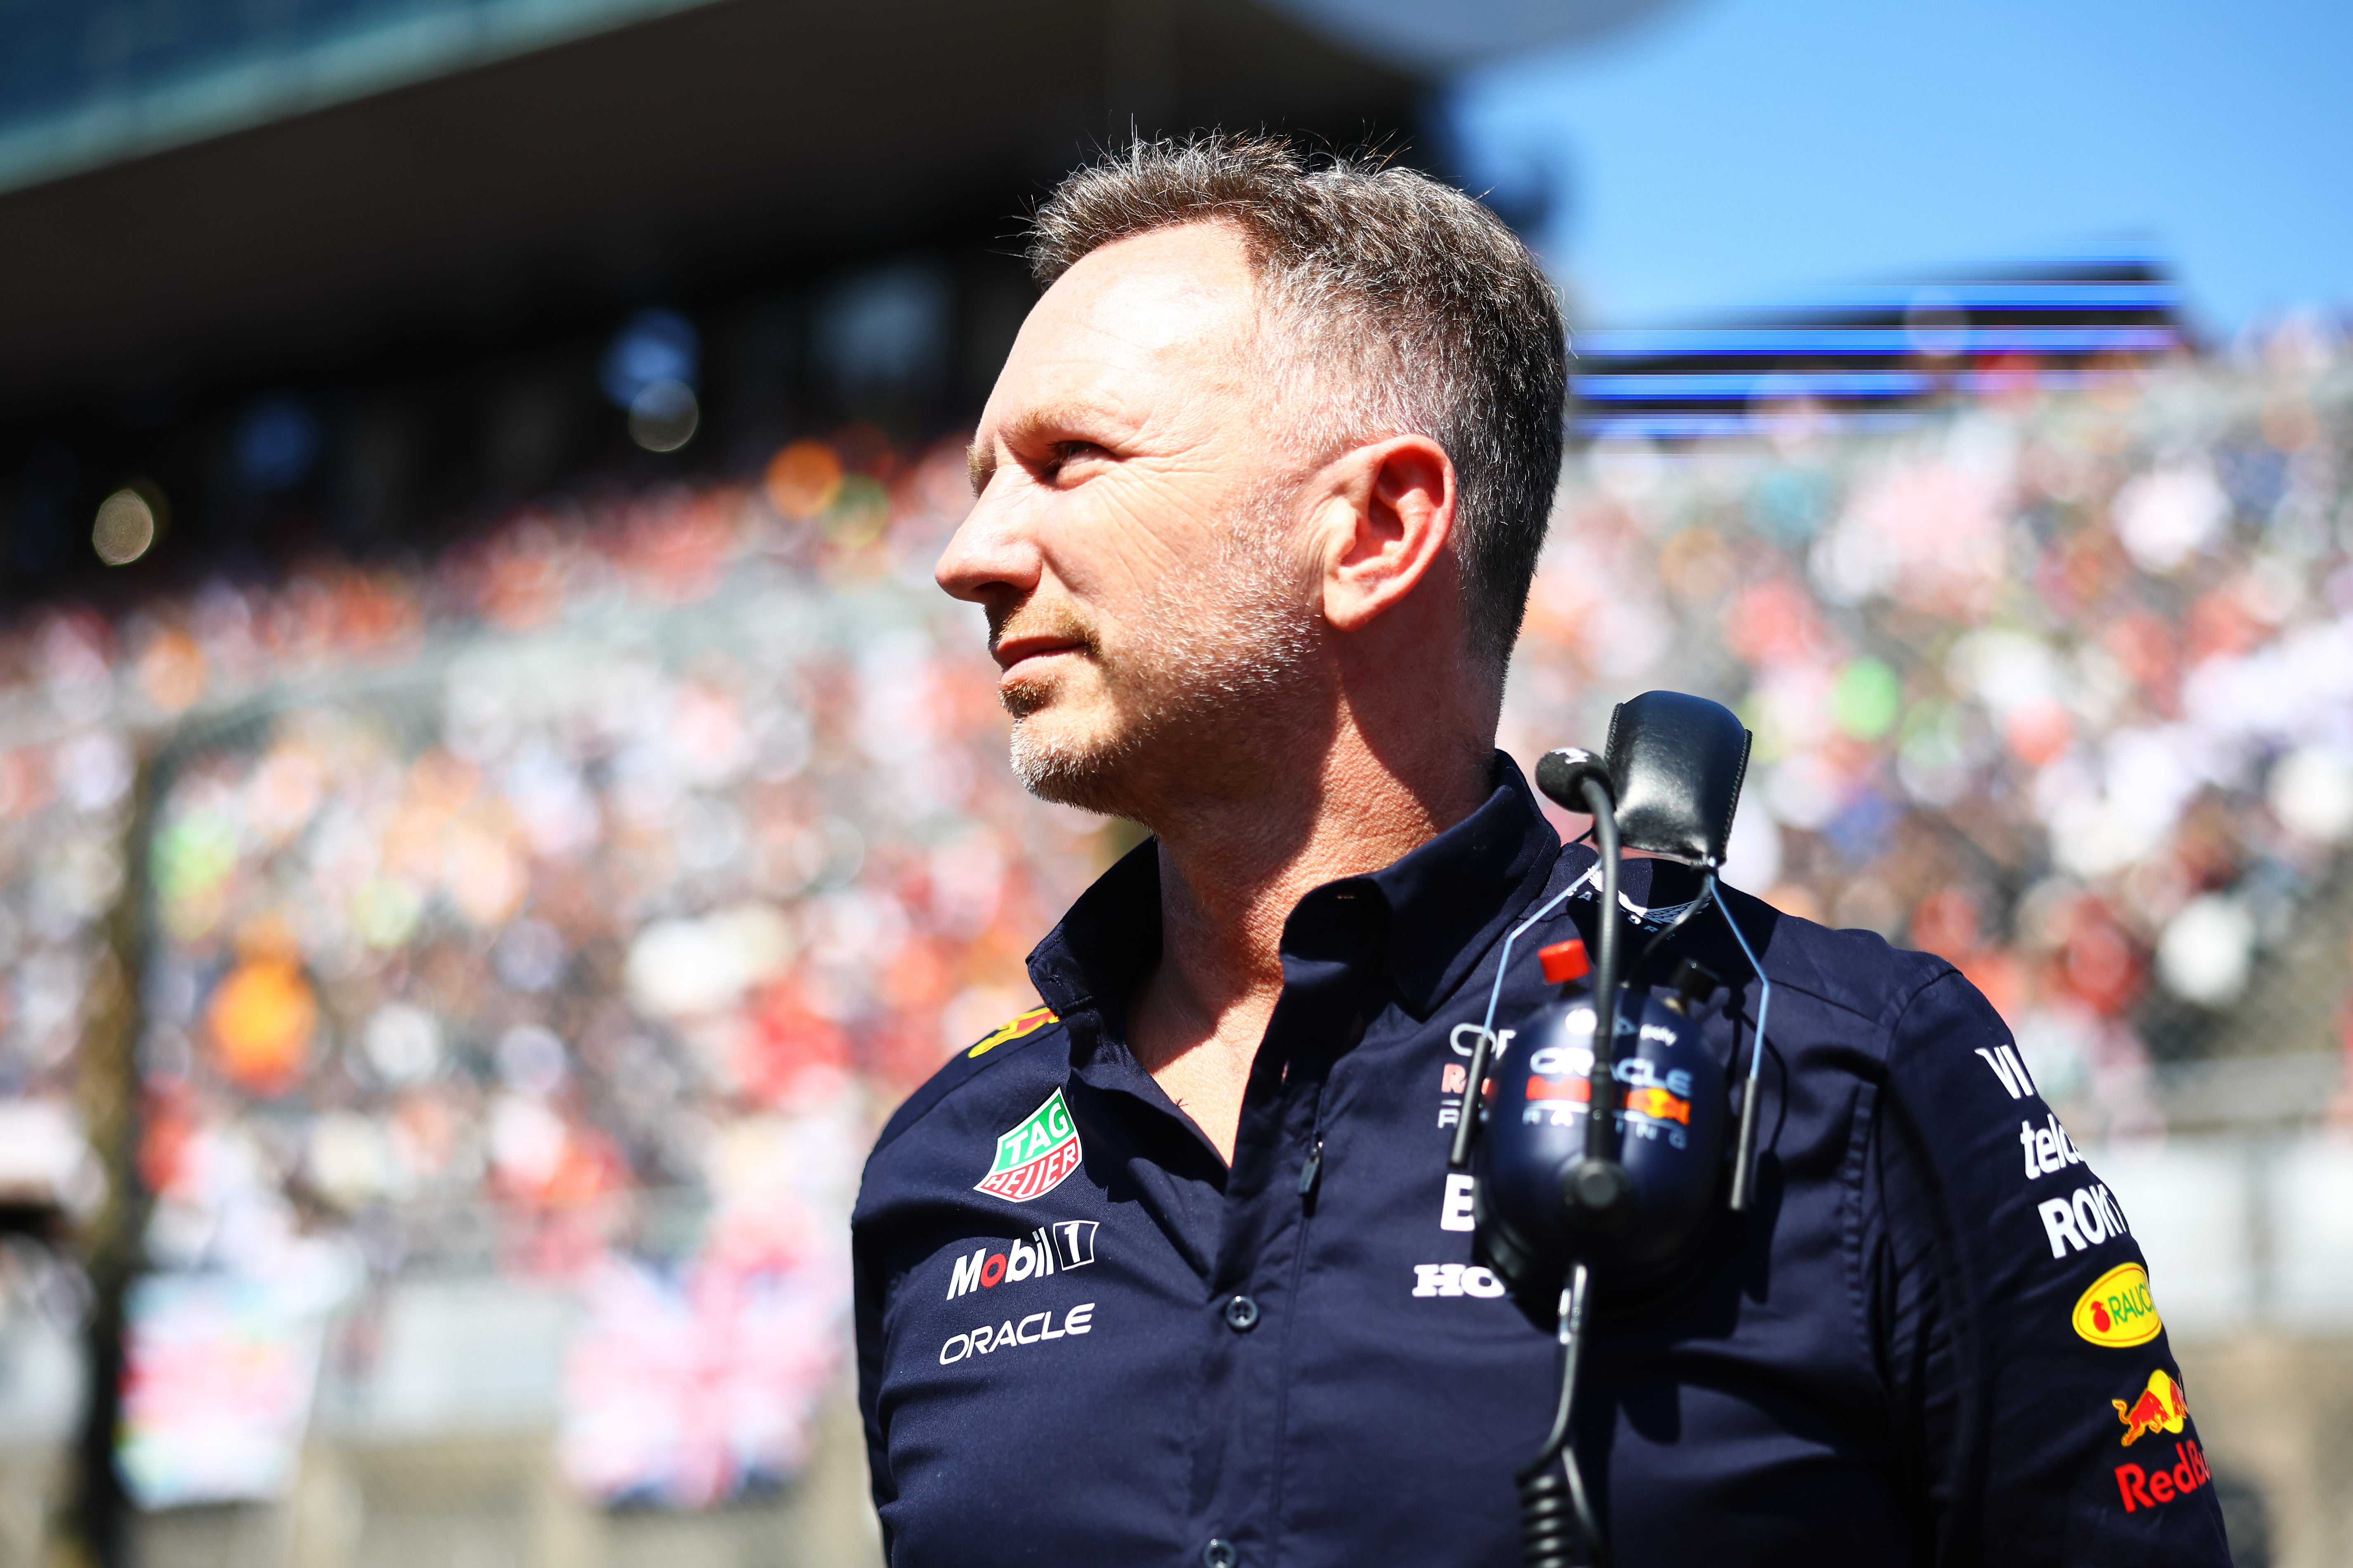 Christian Horner has been present at every F1 race this season while his female colleague is currently suspended